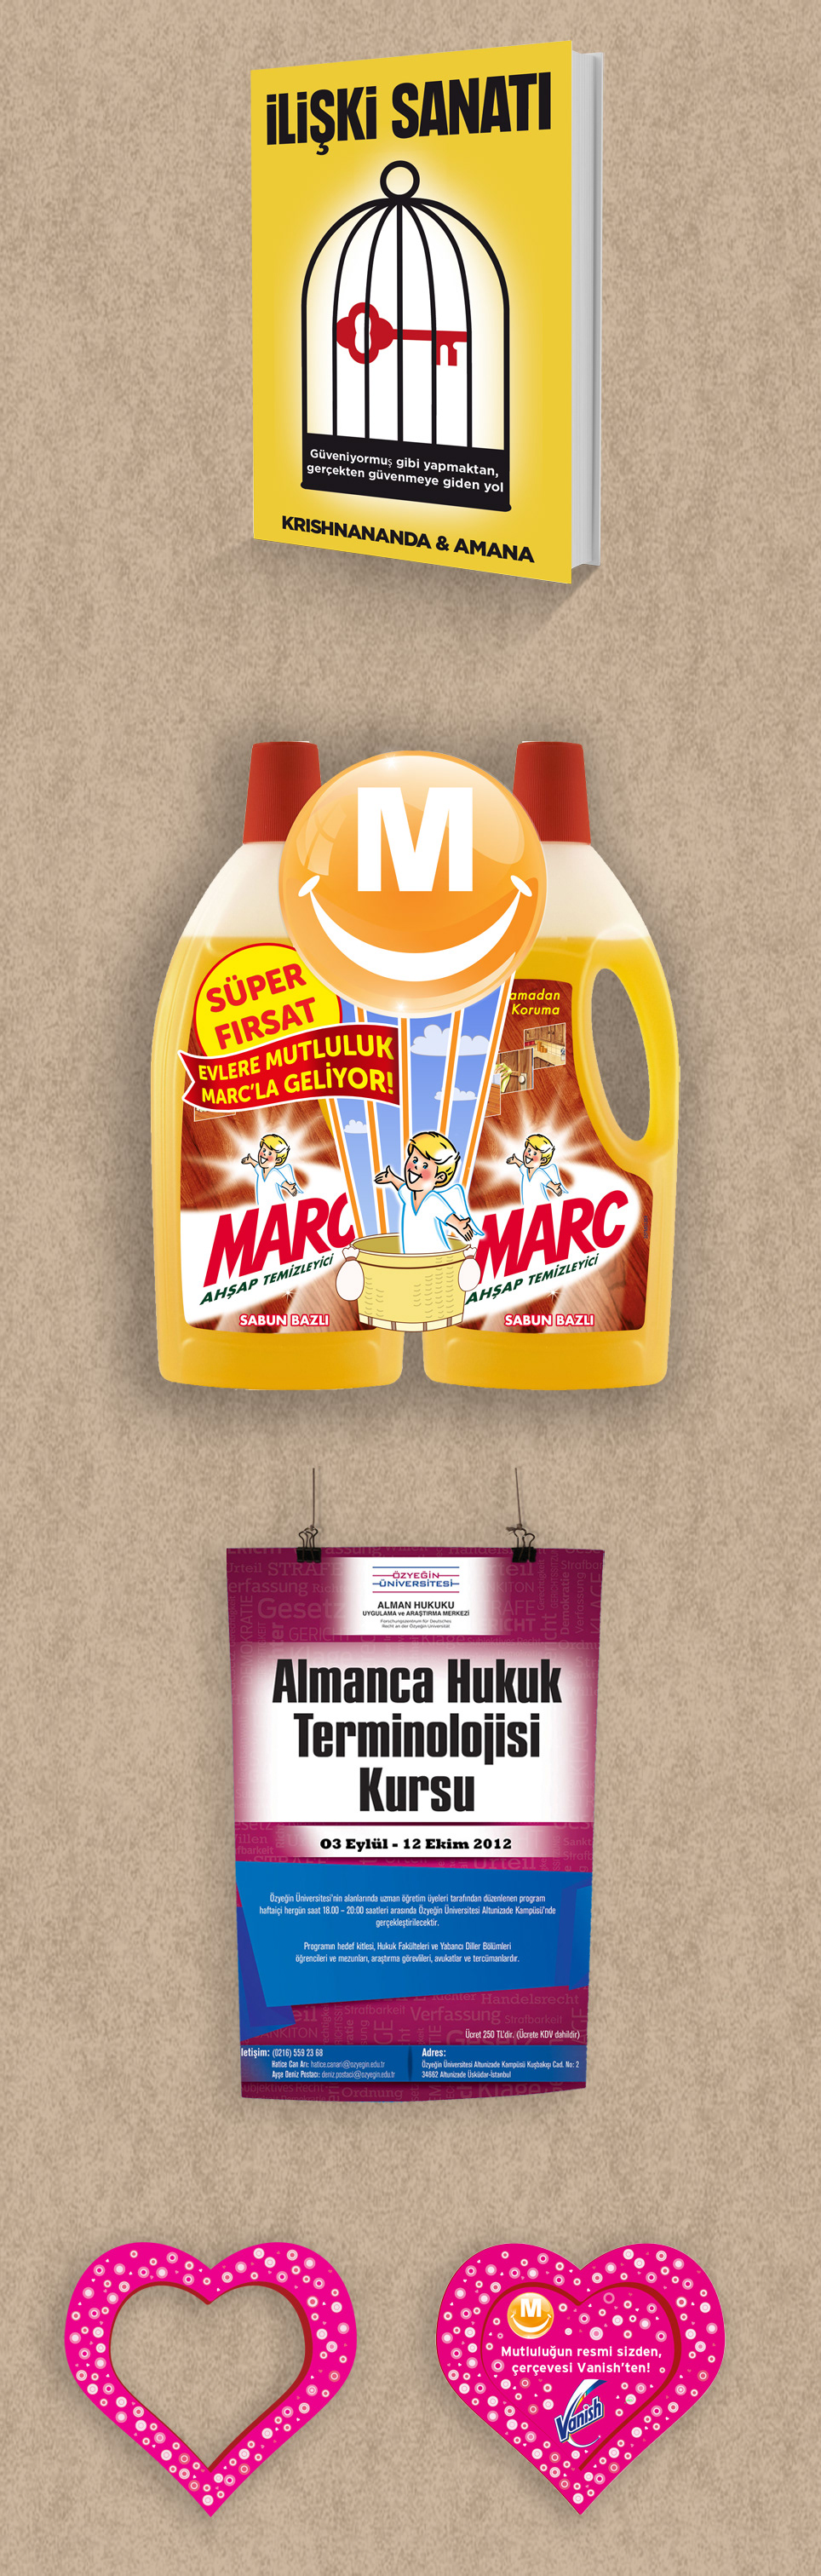 Migros magnet book marc Packaging poster